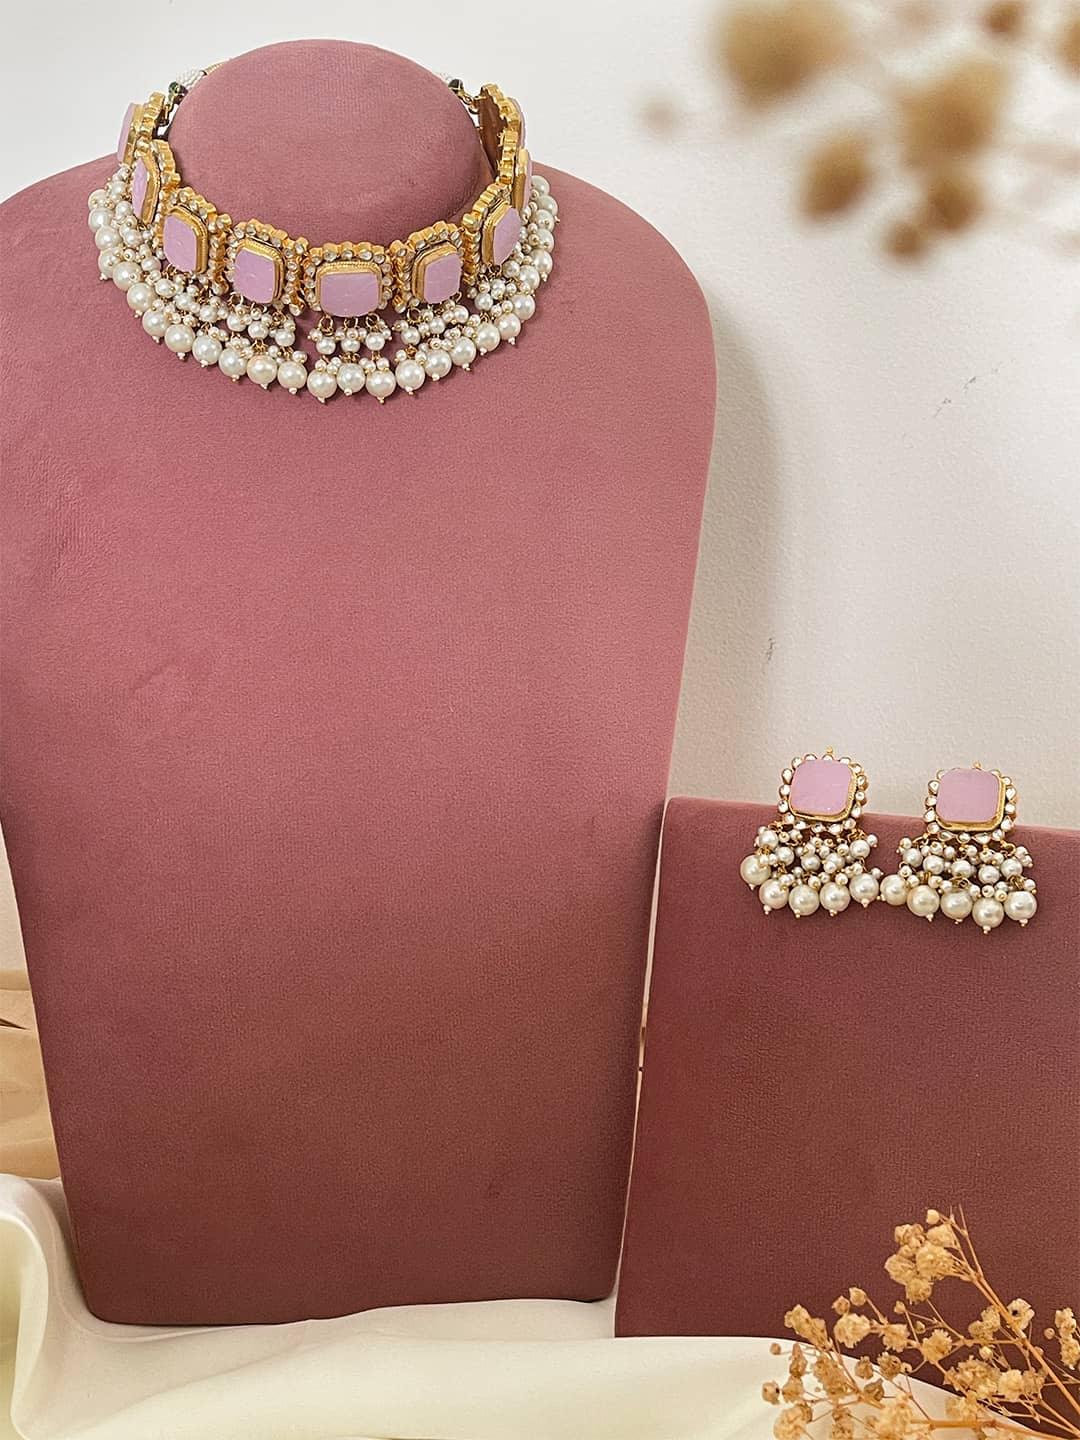 Ishhaara Pink Antique Gold Choker Necklace With Pearl Beads